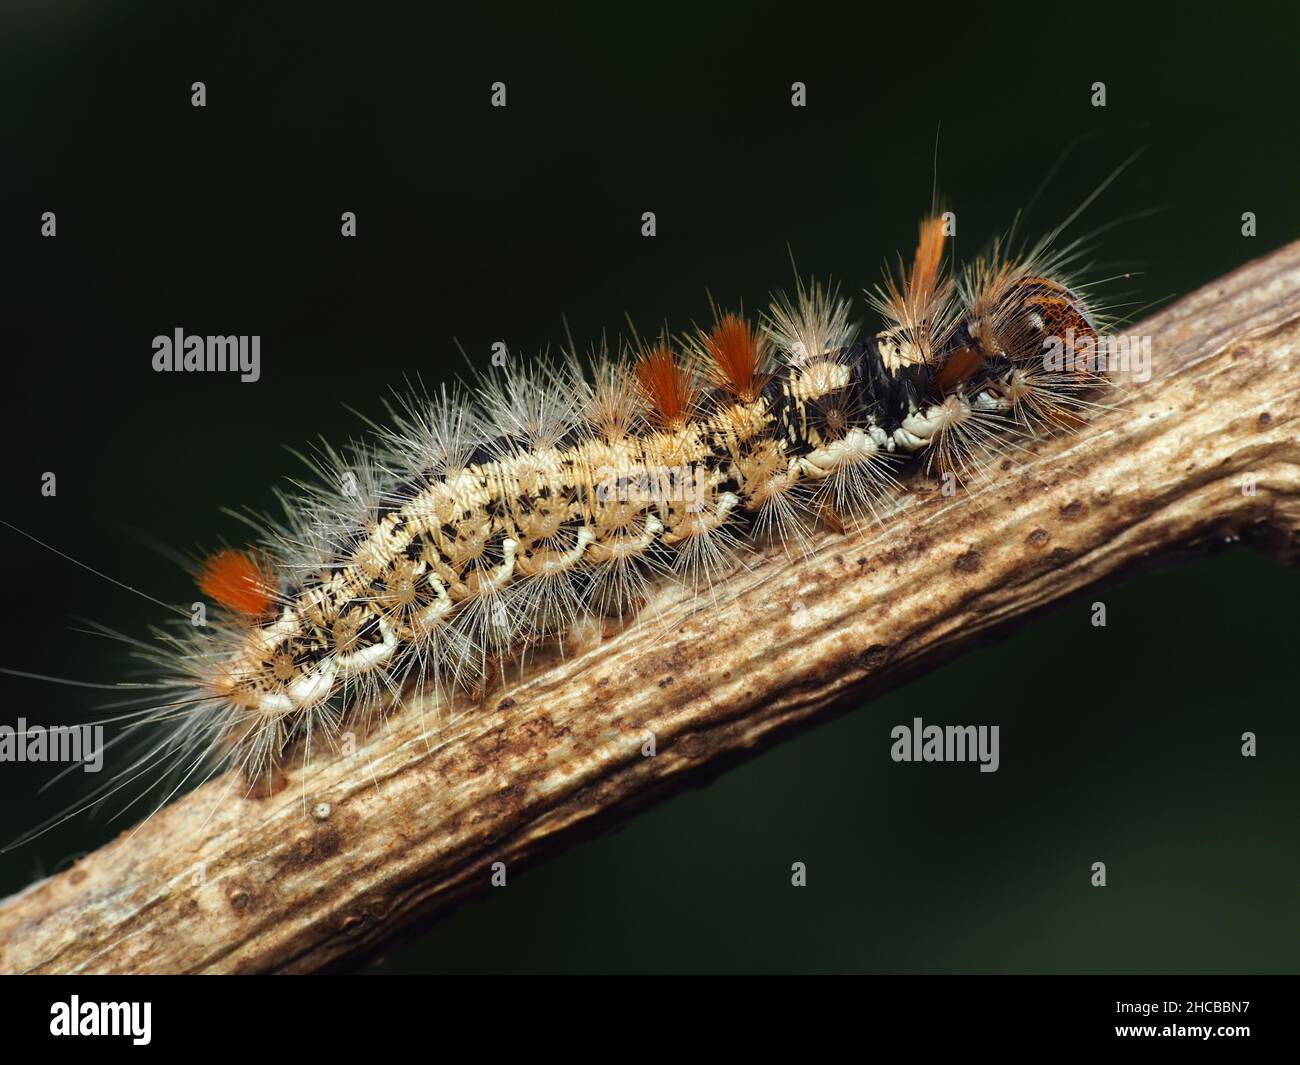 Nut-tree Tussock moth caterpillar (Colocasia coryli) at rest on twig. Tipperary, Ireland. Stock Photo